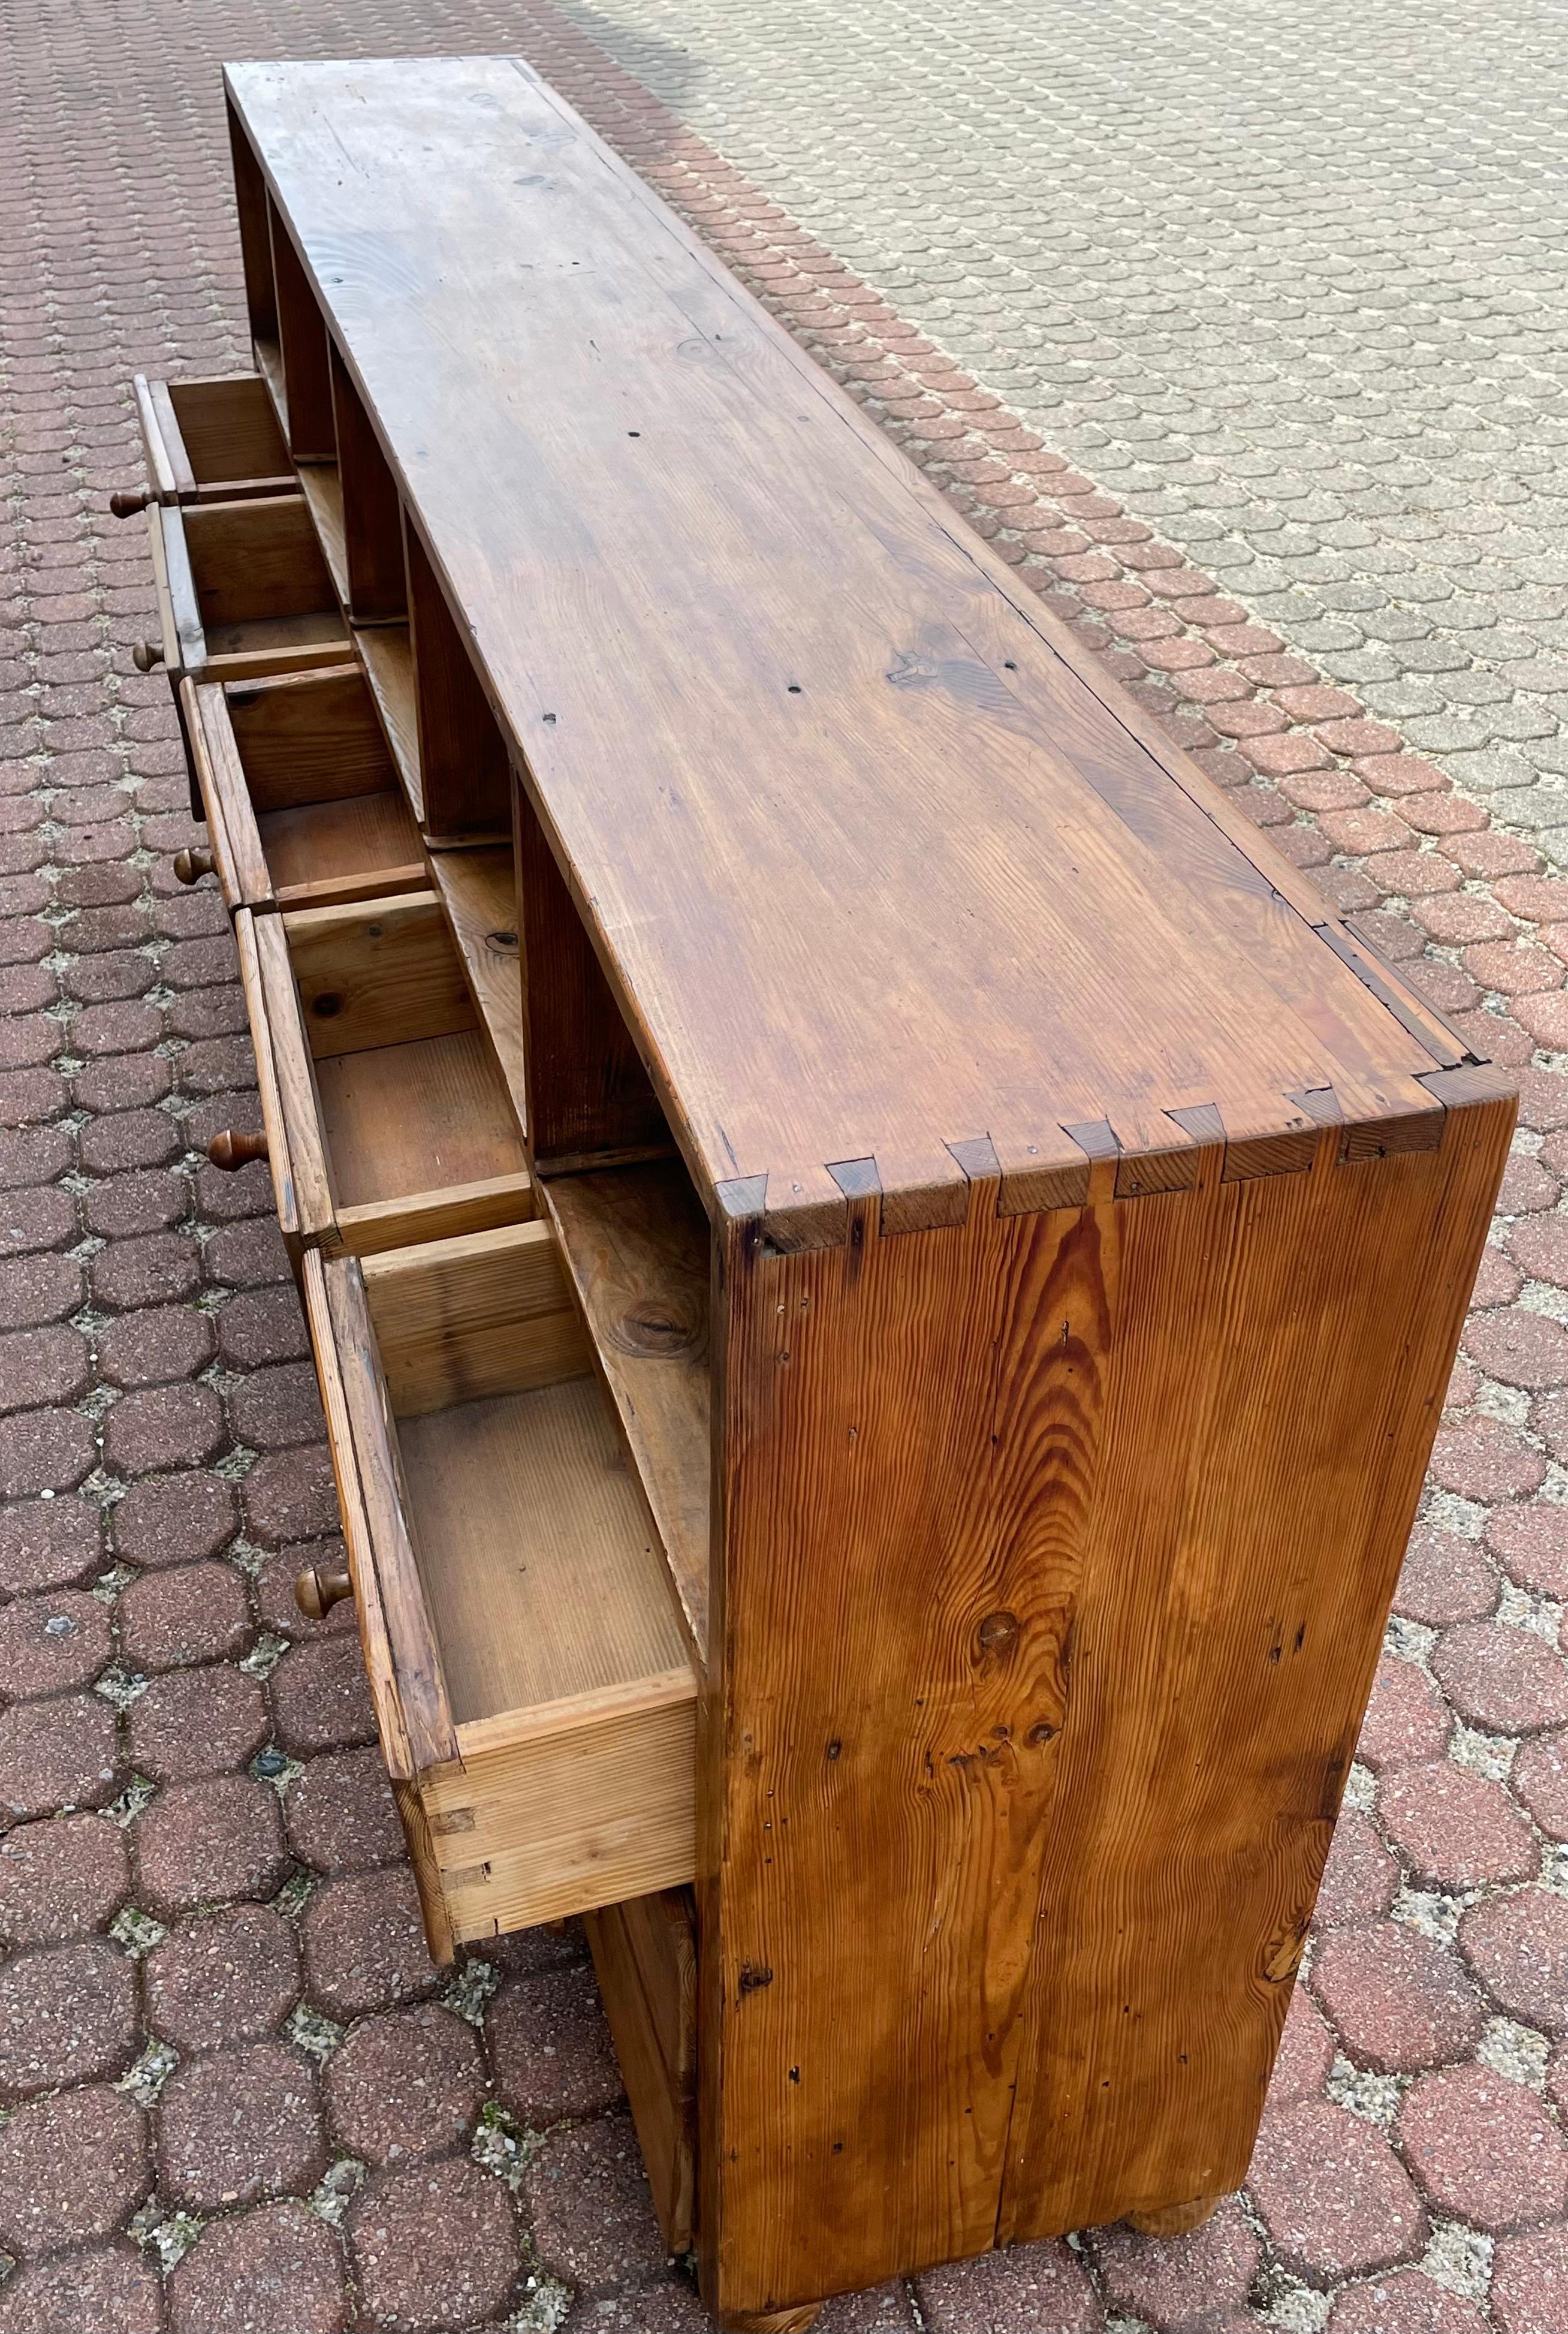 Lovely 19th Century Pine Server with five horizontal open compartments, each above three drawers with wooden knob pulls (two replaced), all resting on bun feet. Great low and shallow piece that can serve as a server or credenza with storage for